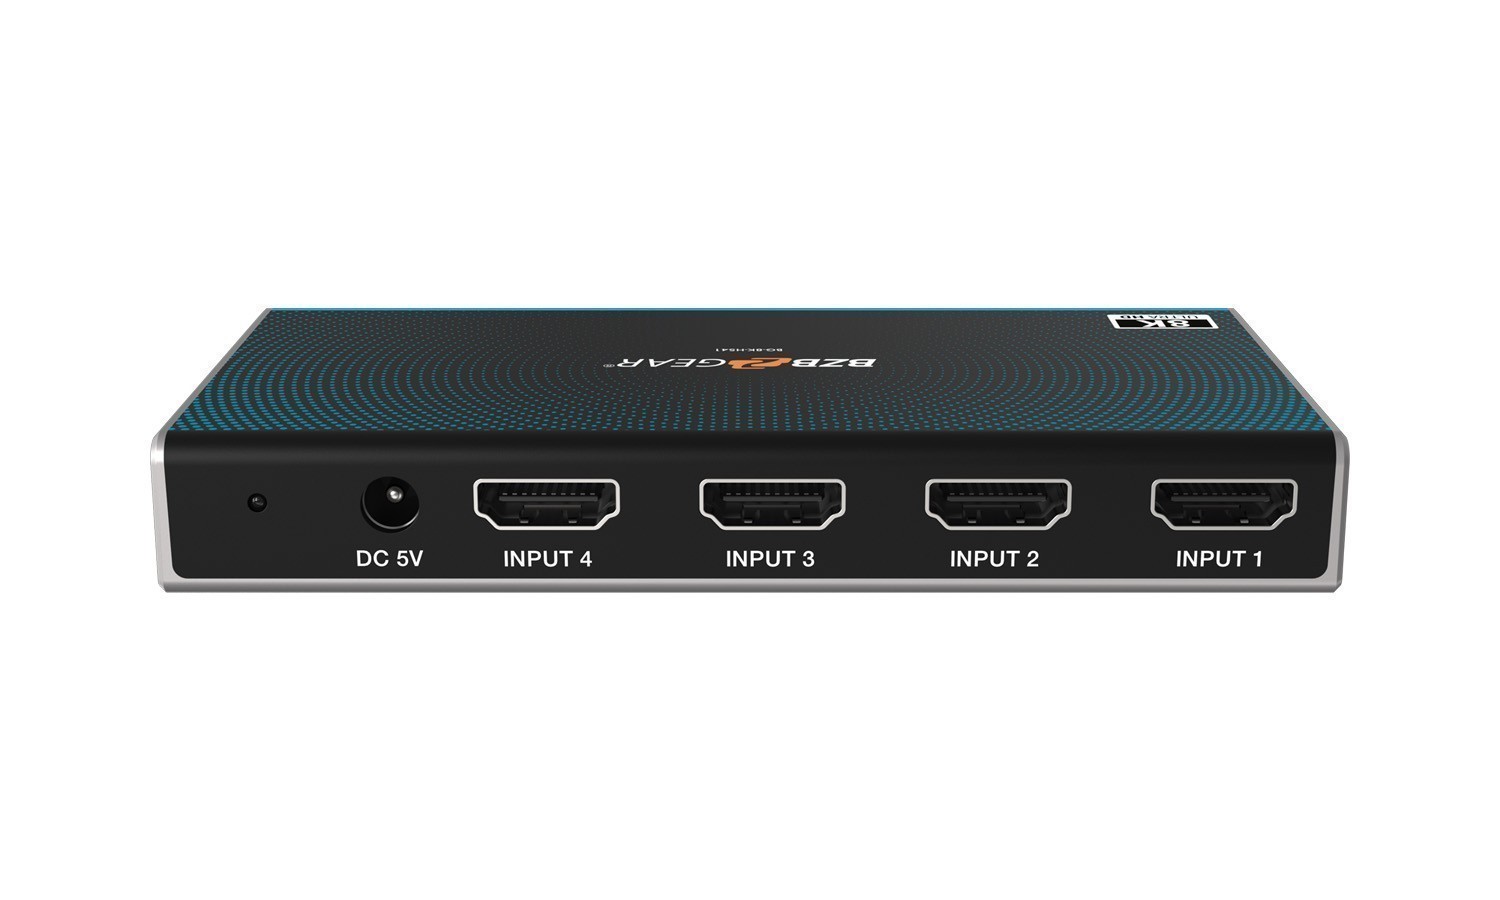 2-Port 8K HDMI Switch, HDMI 2.1 Switcher 4K 120Hz HDR10+, 8K 60Hz UHD, HDMI  Switch 2 In 1 Out, Auto/Manual Source Switching, Power Adapter and Remote